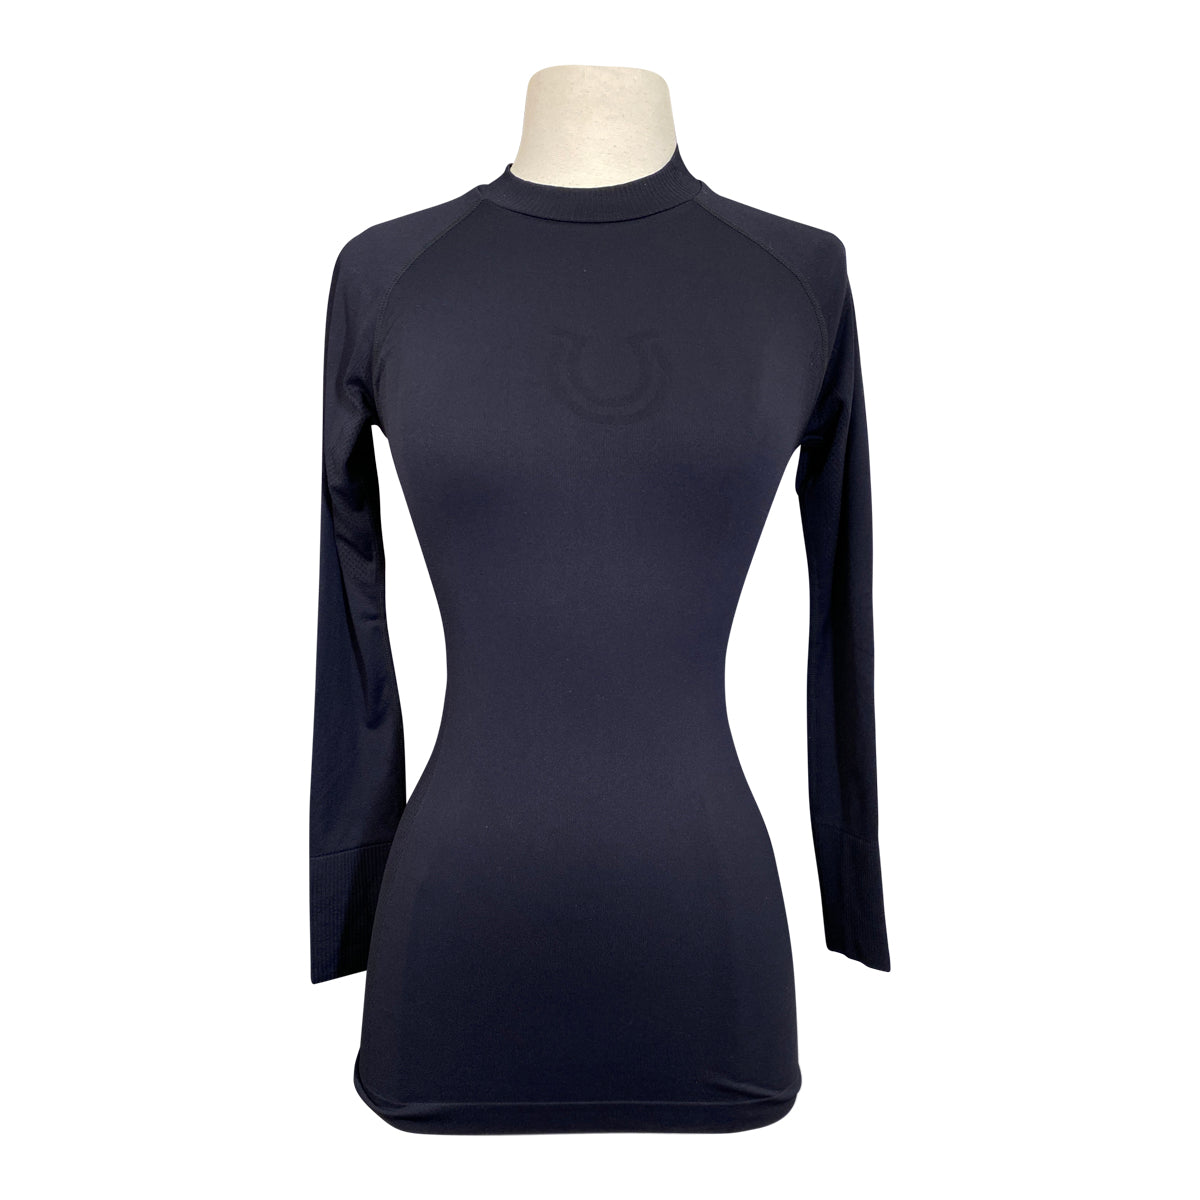 Front of FitEq Long Sleeve Seamless Schooling Top in Midnight - Women's S/M